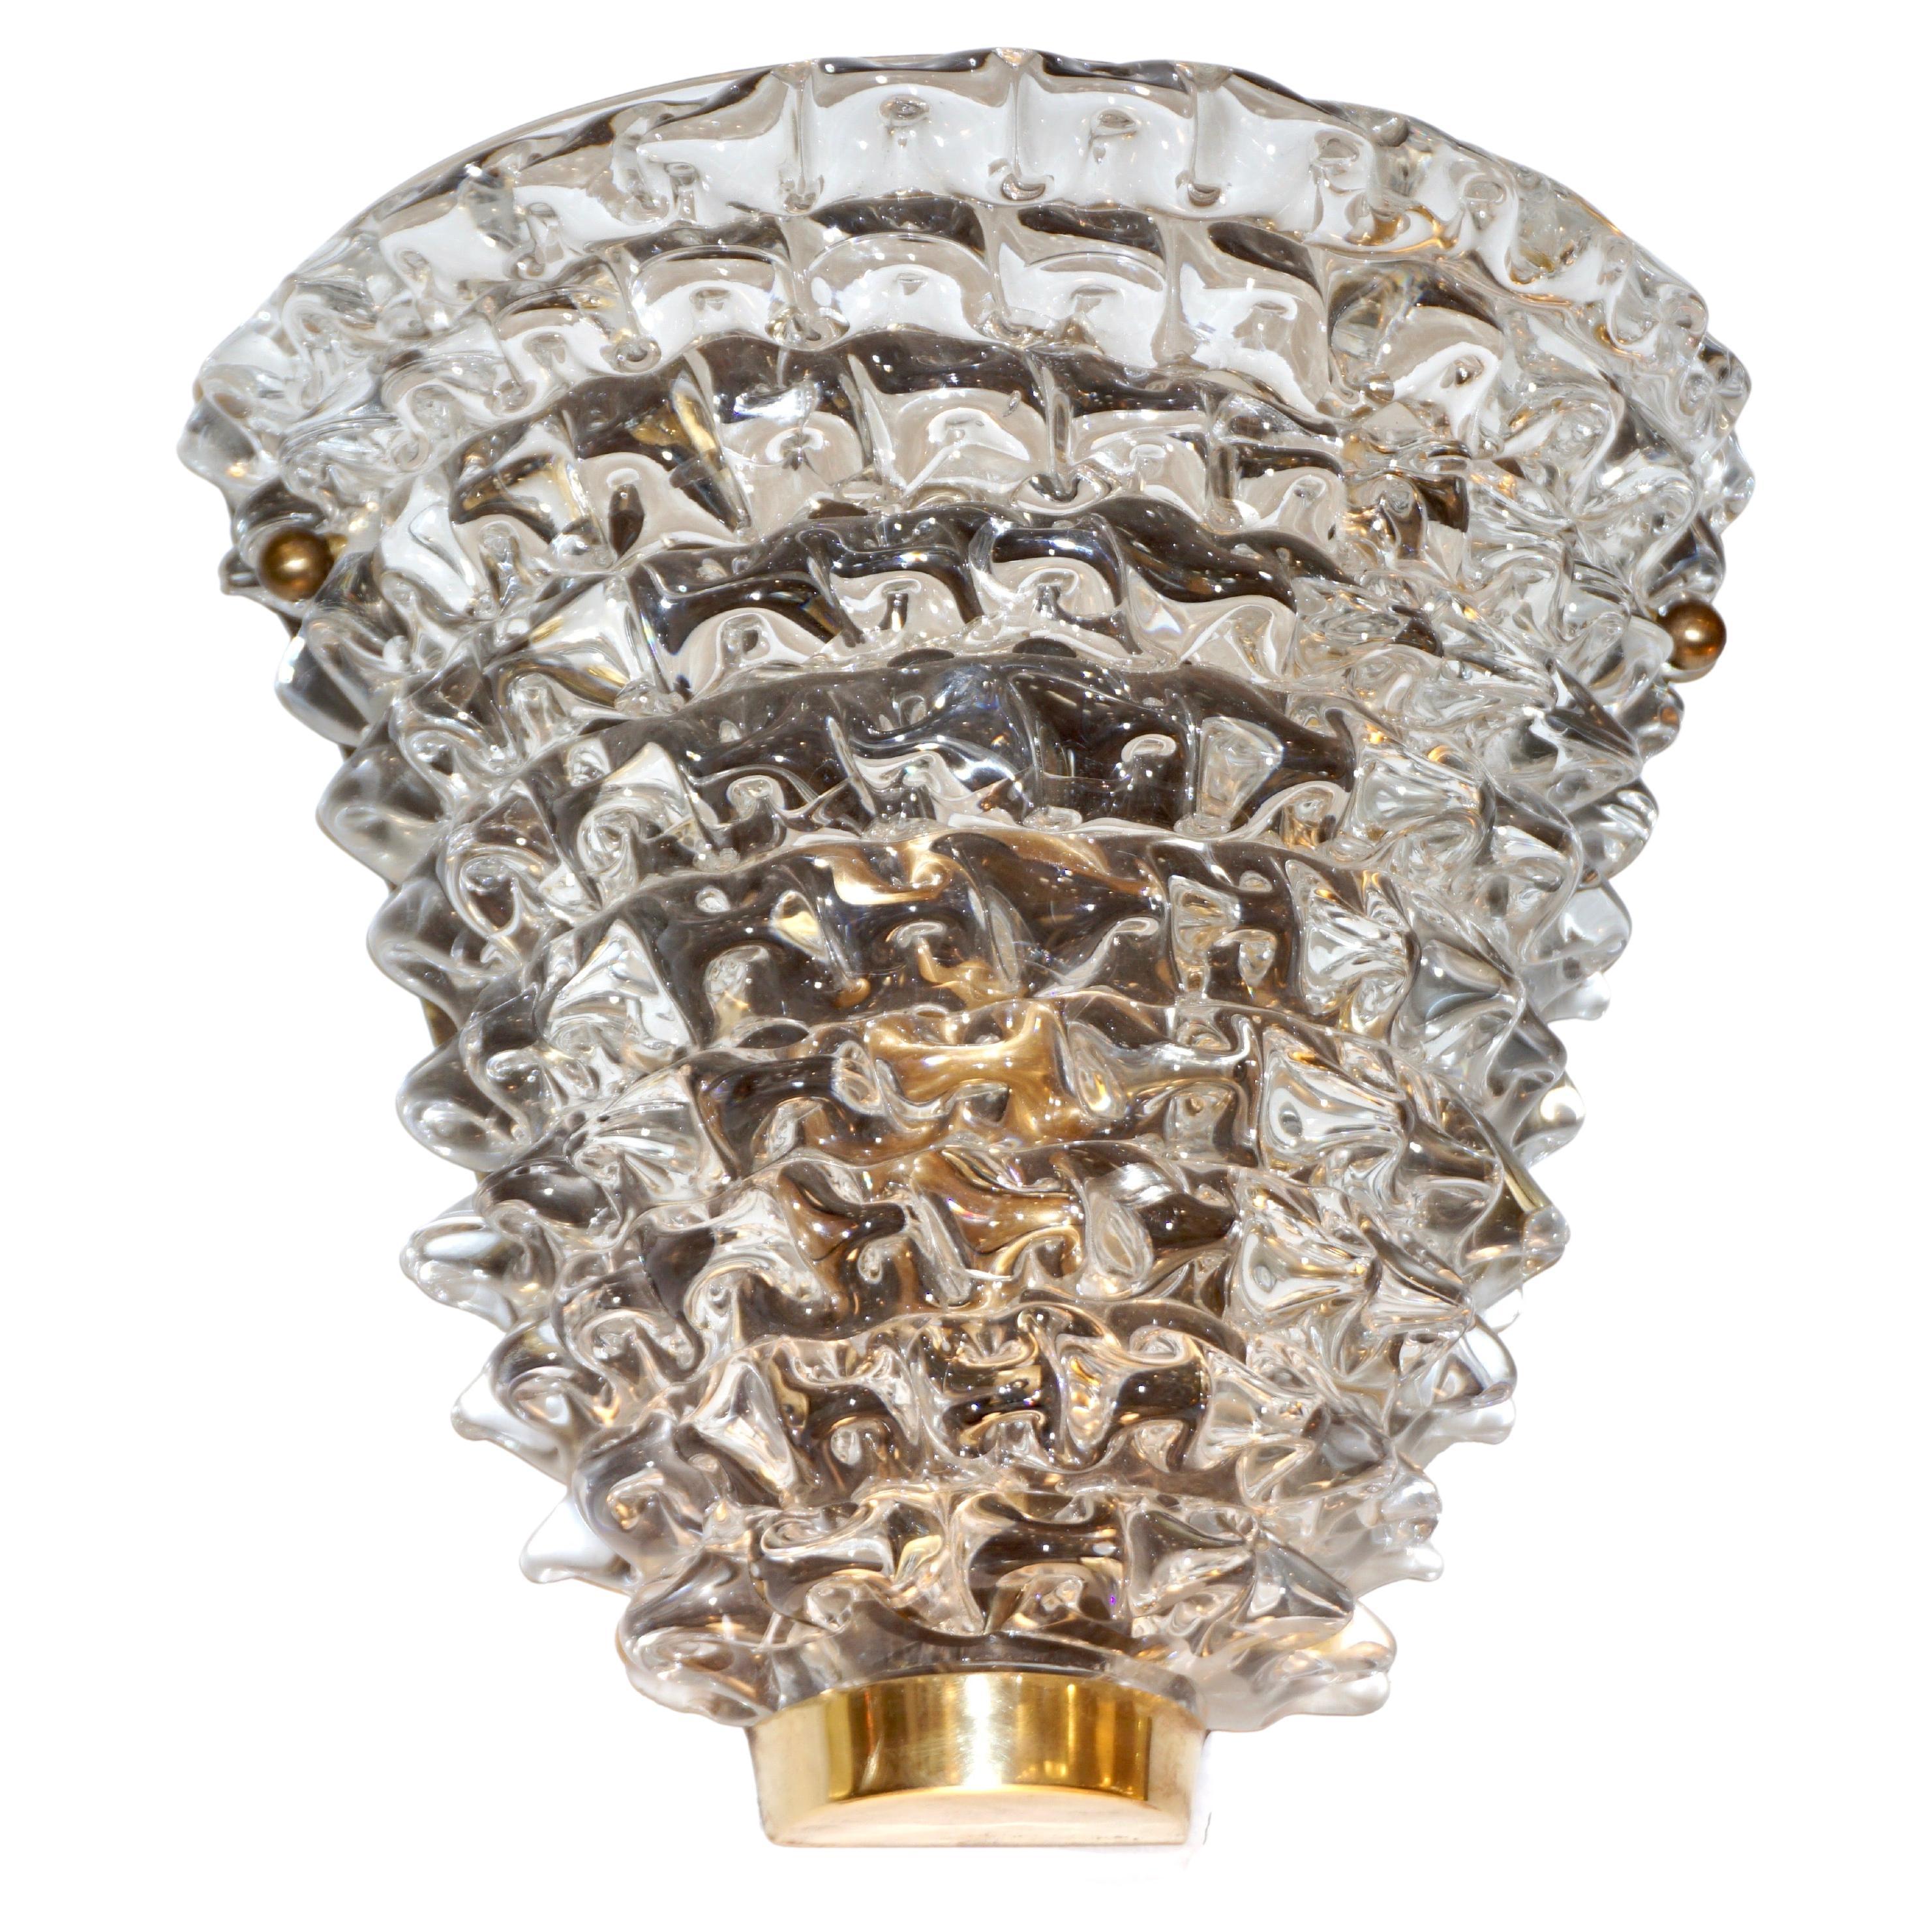 Contemporary Italian Brass & Crystal Rostrato Textured Murano Glass Sconce For Sale